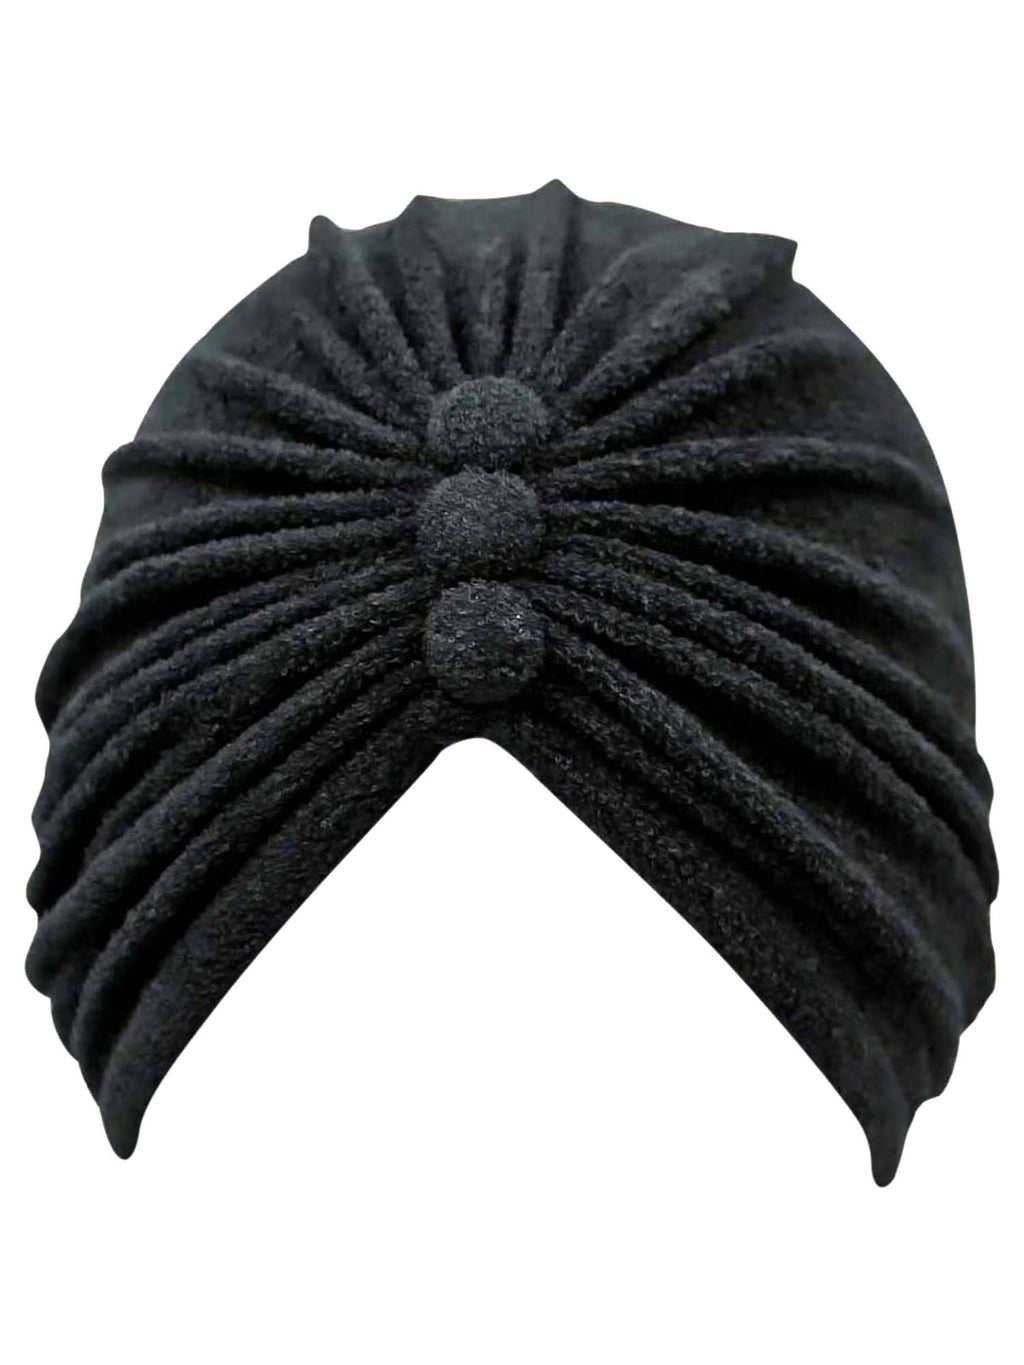 Terry Cloth Turban Head Wrap With Button Detail